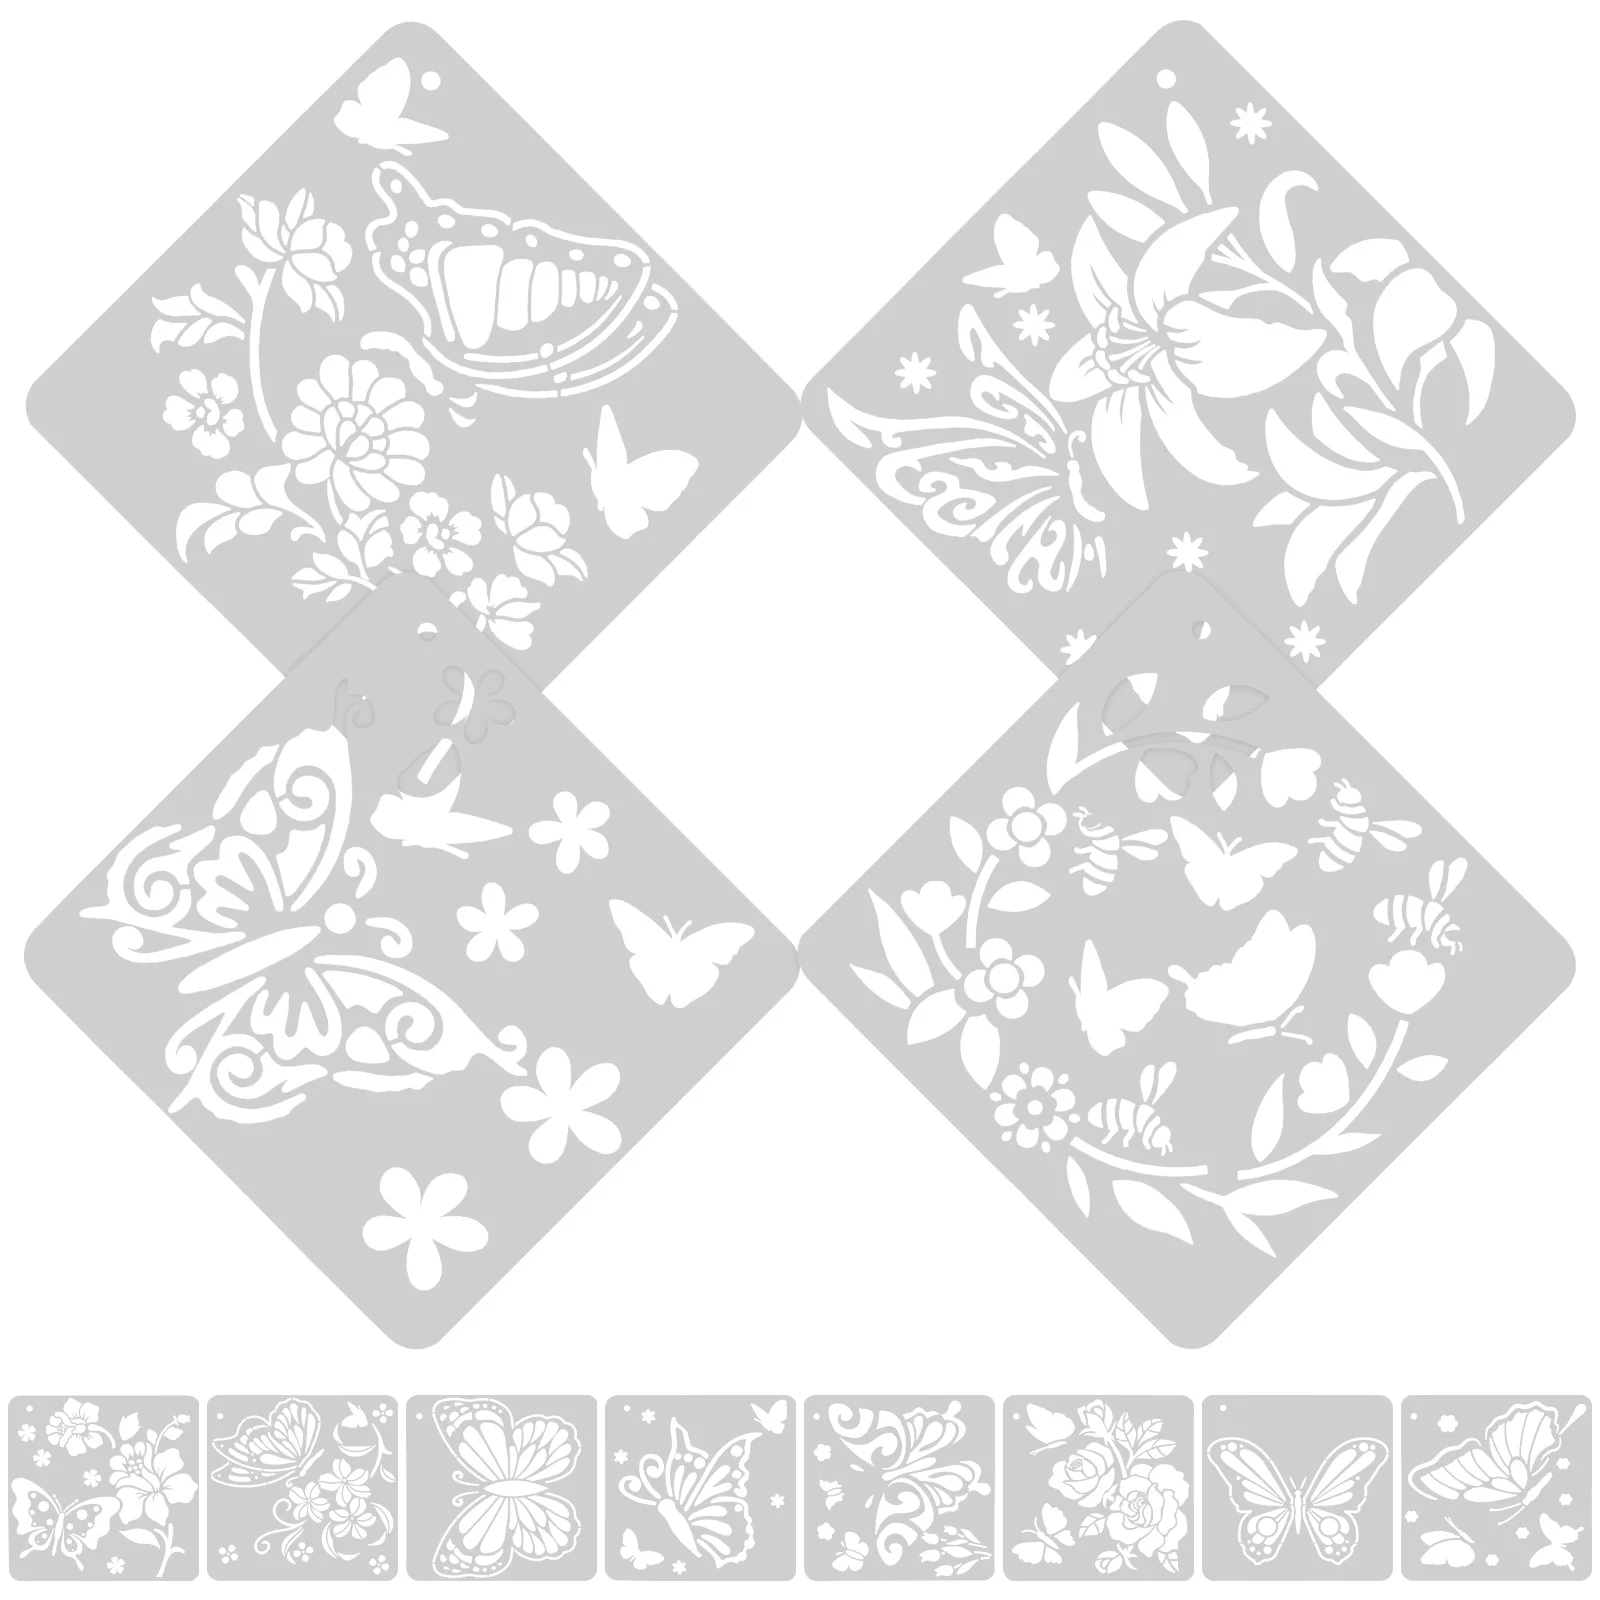 

Butterflies Template Butterfly Painting Stencil Craft Stencil Large Stencils Coloring Embossing Album